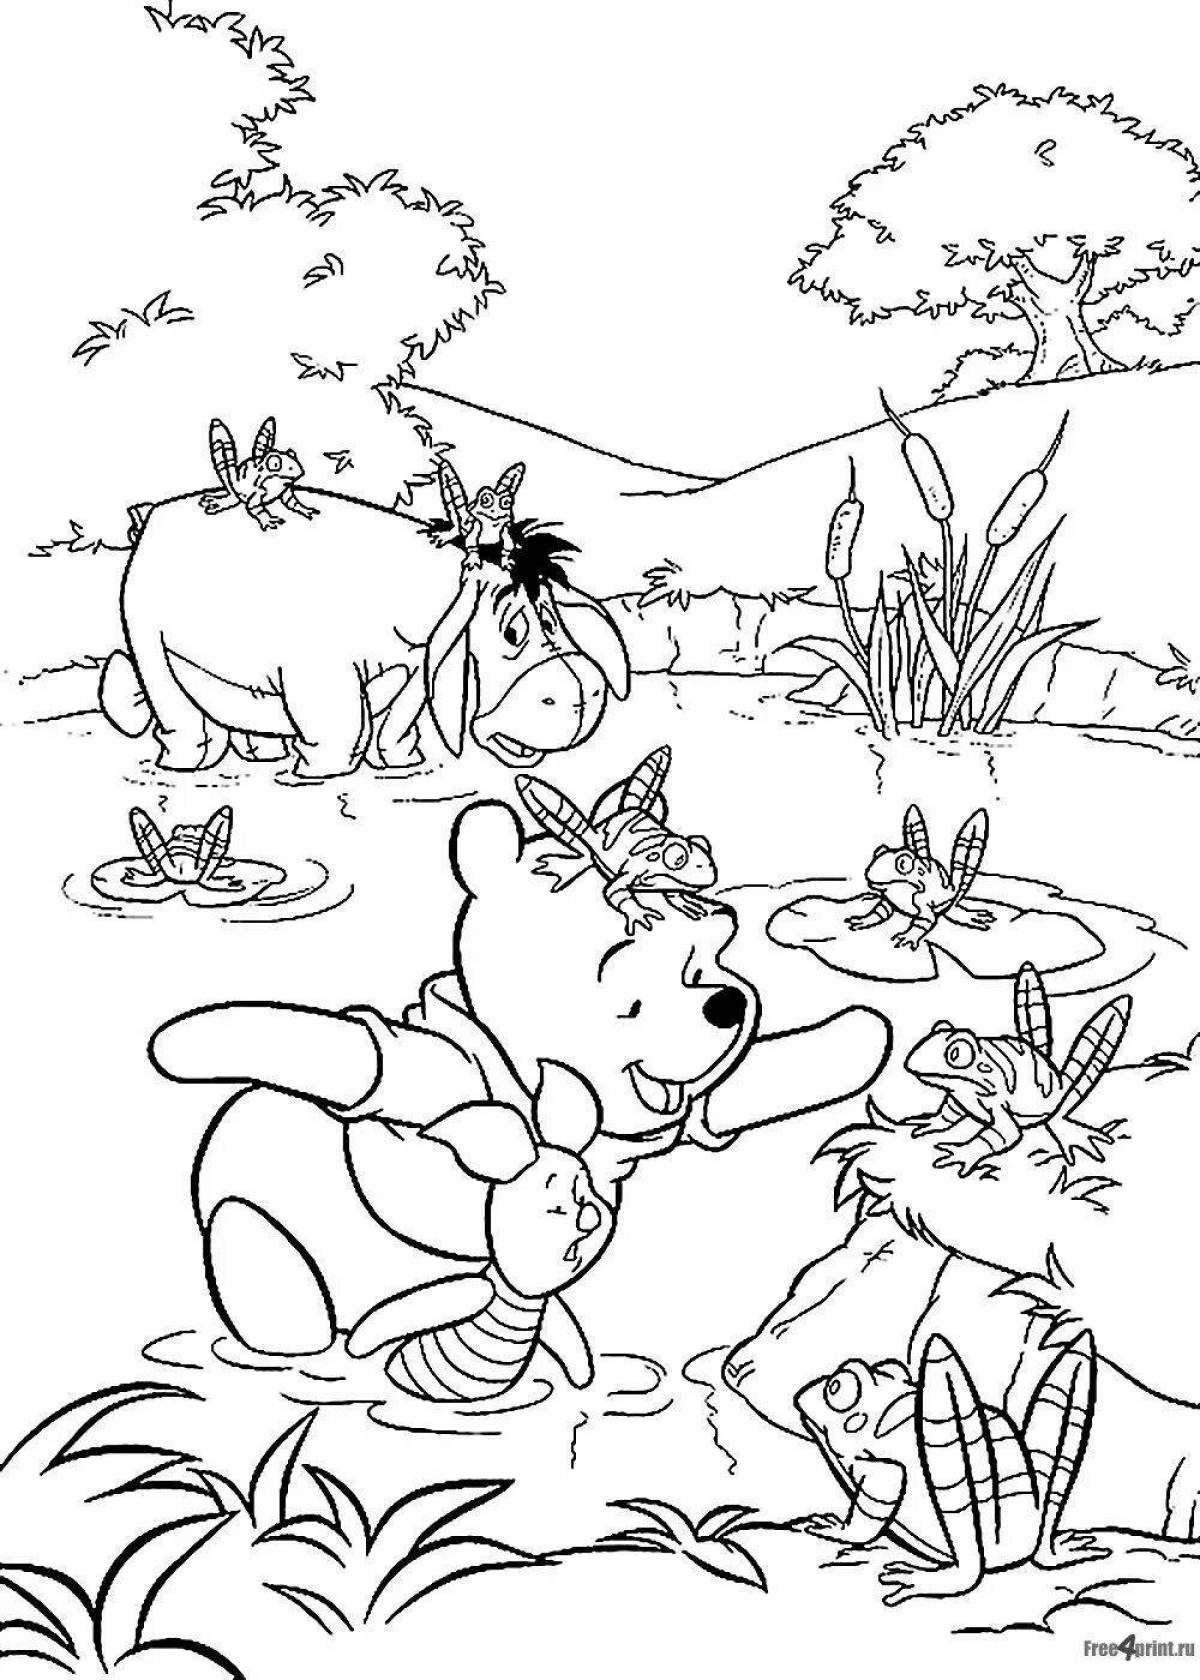 Festive Soviet coloring Winnie the Pooh and his friends